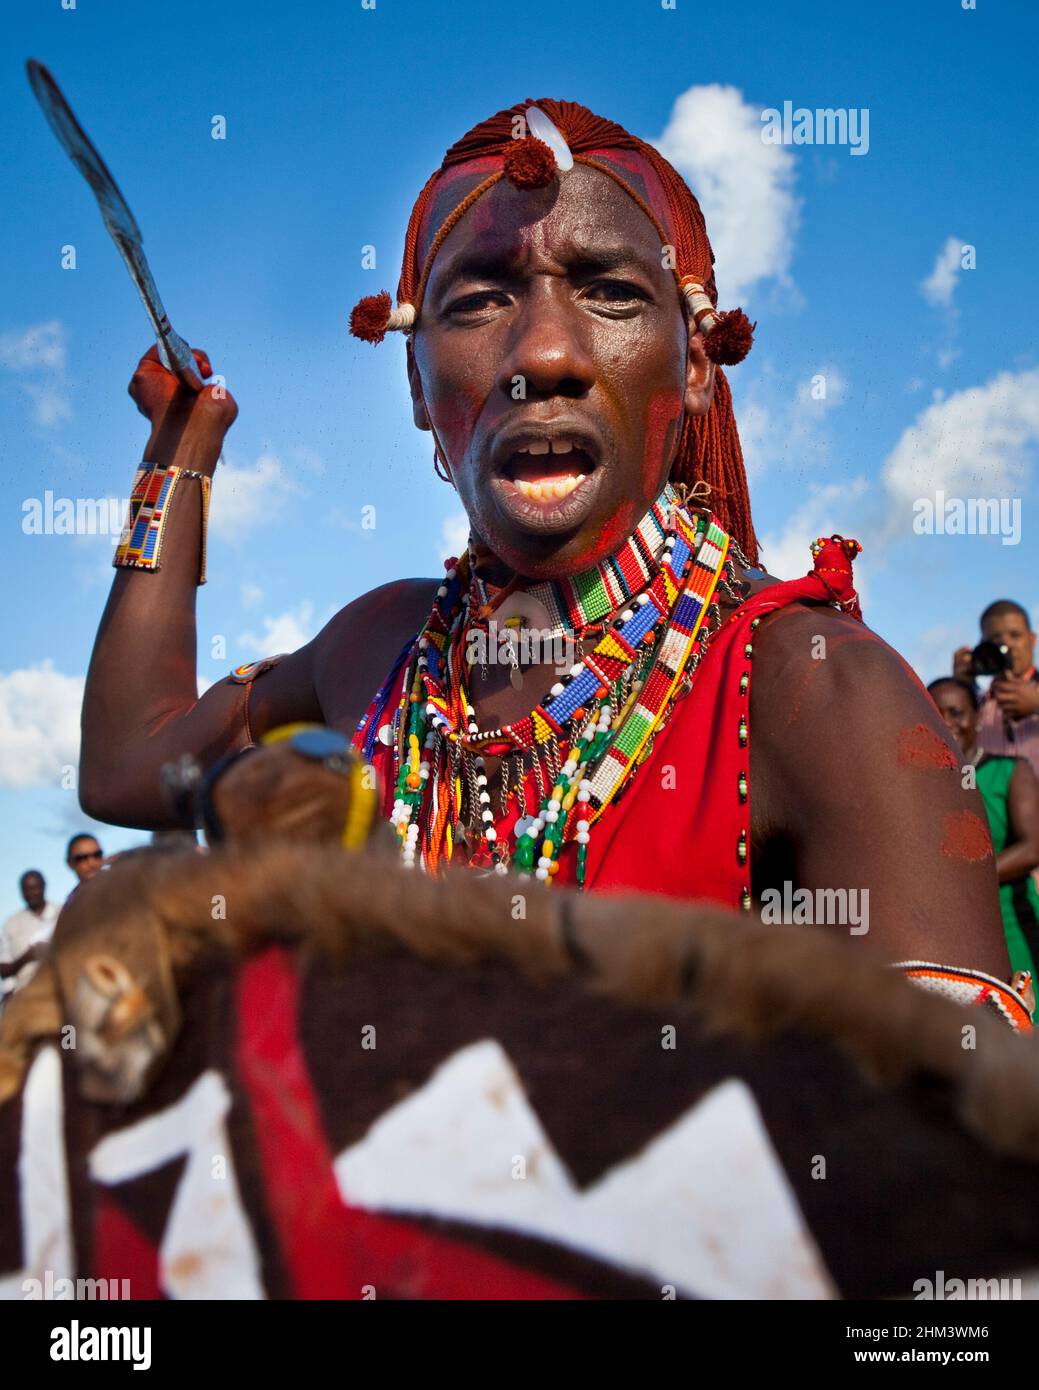 Maasai warrior from the Kenyan contingent brandishing a spear in a street performance at the Seychelles Carnival. Stock Photo